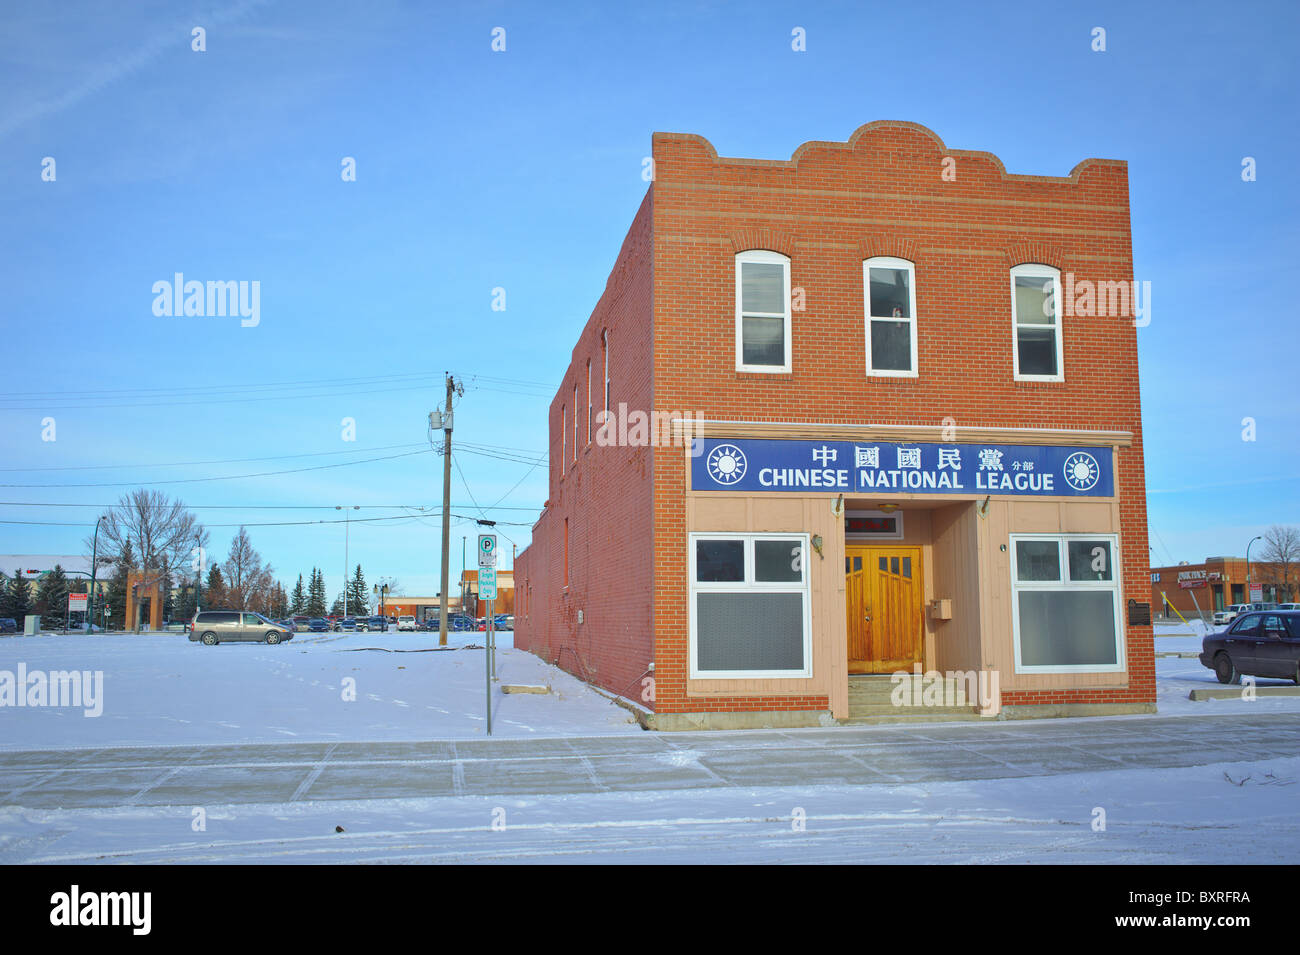 Chinese National League building in Lethbridge Alberta Canada Stock Photo